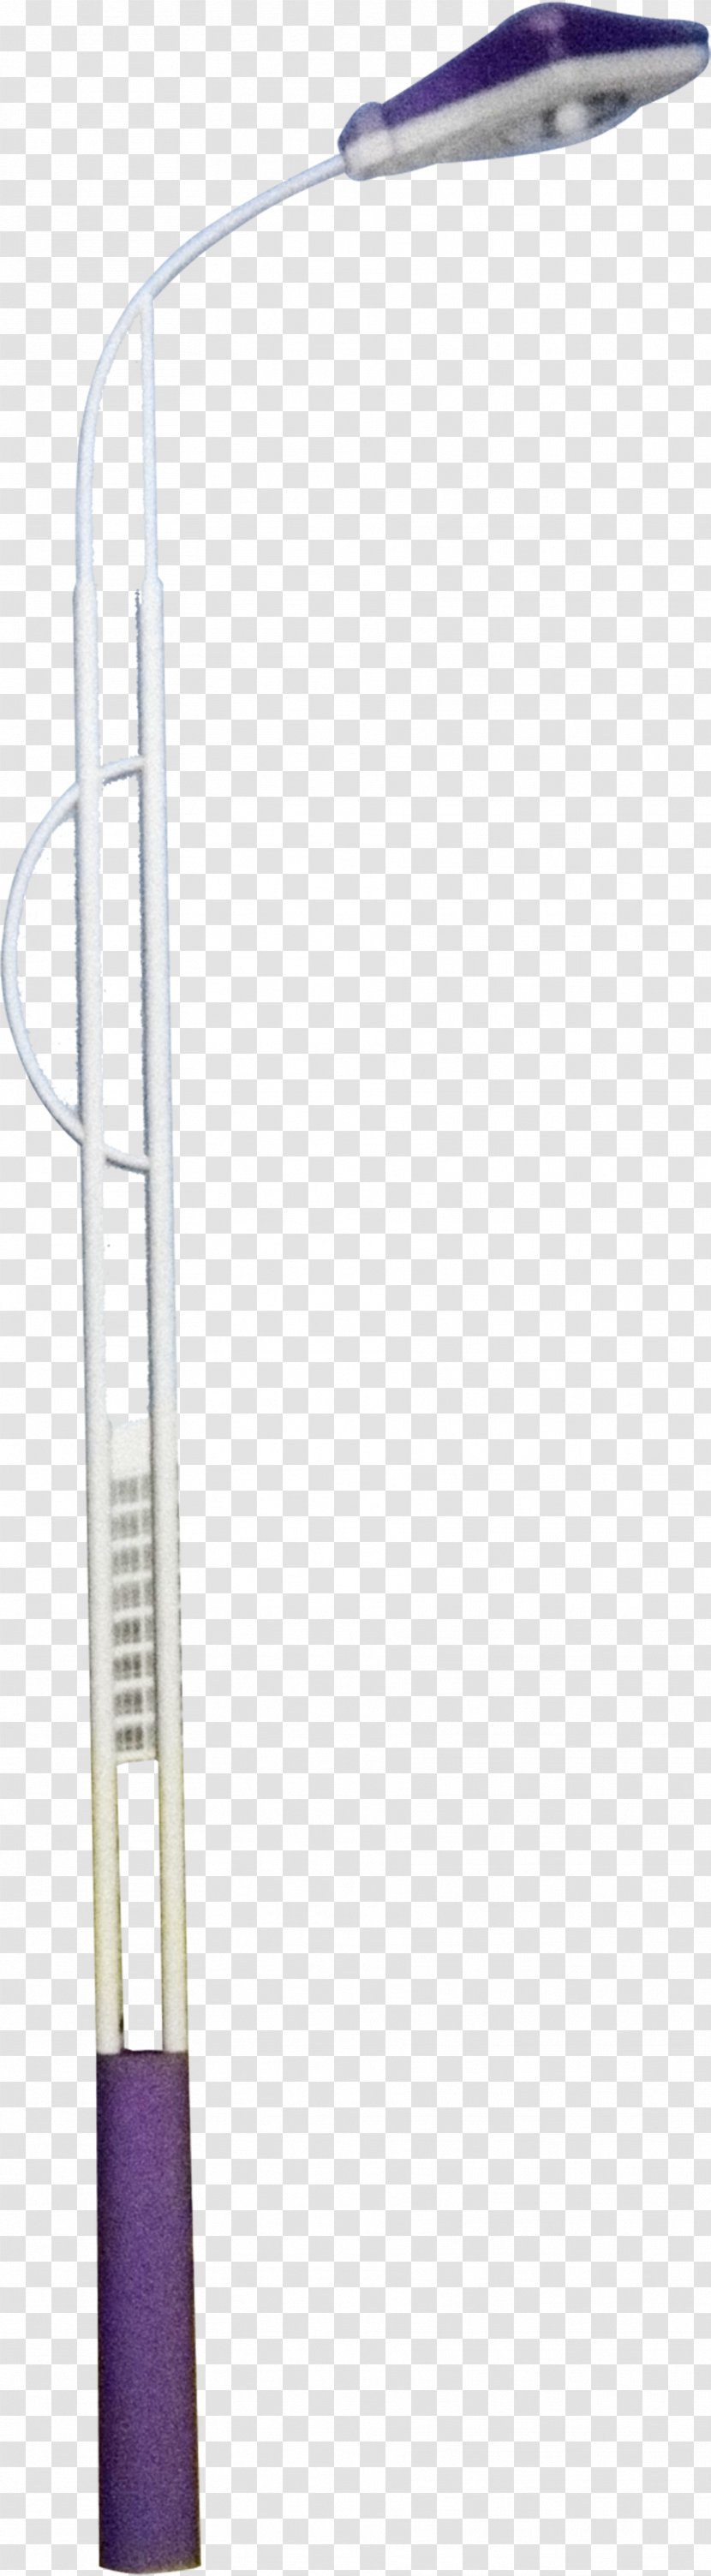 Street Light Lamp Icon - European-style Pole Texture Modeling Renderings Transparent PNG